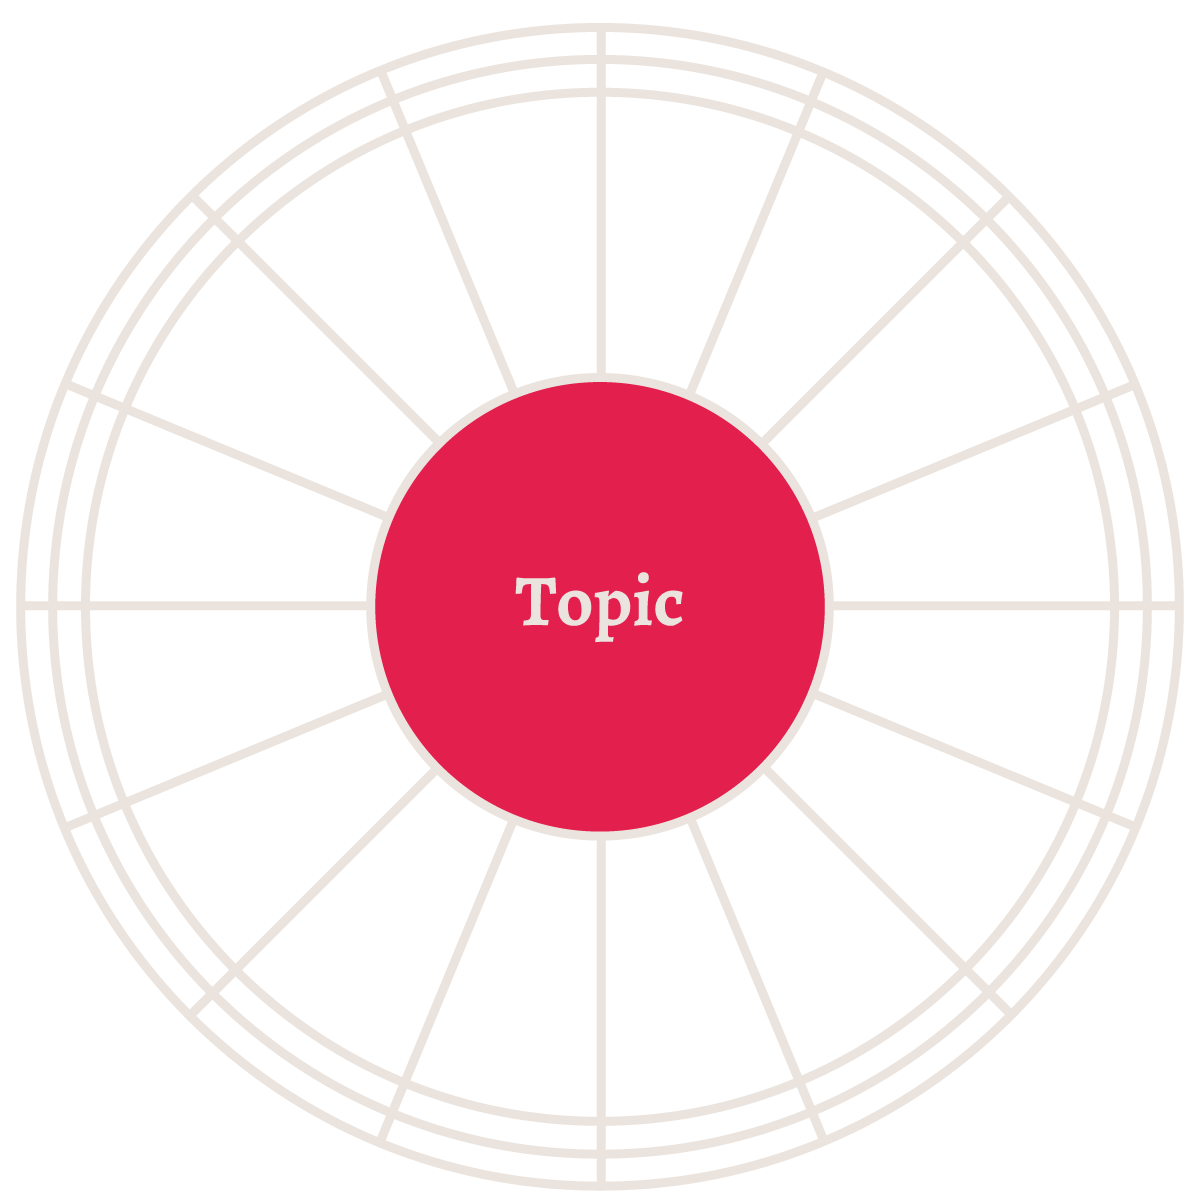 The topic is in the center of the Content Topic wheel